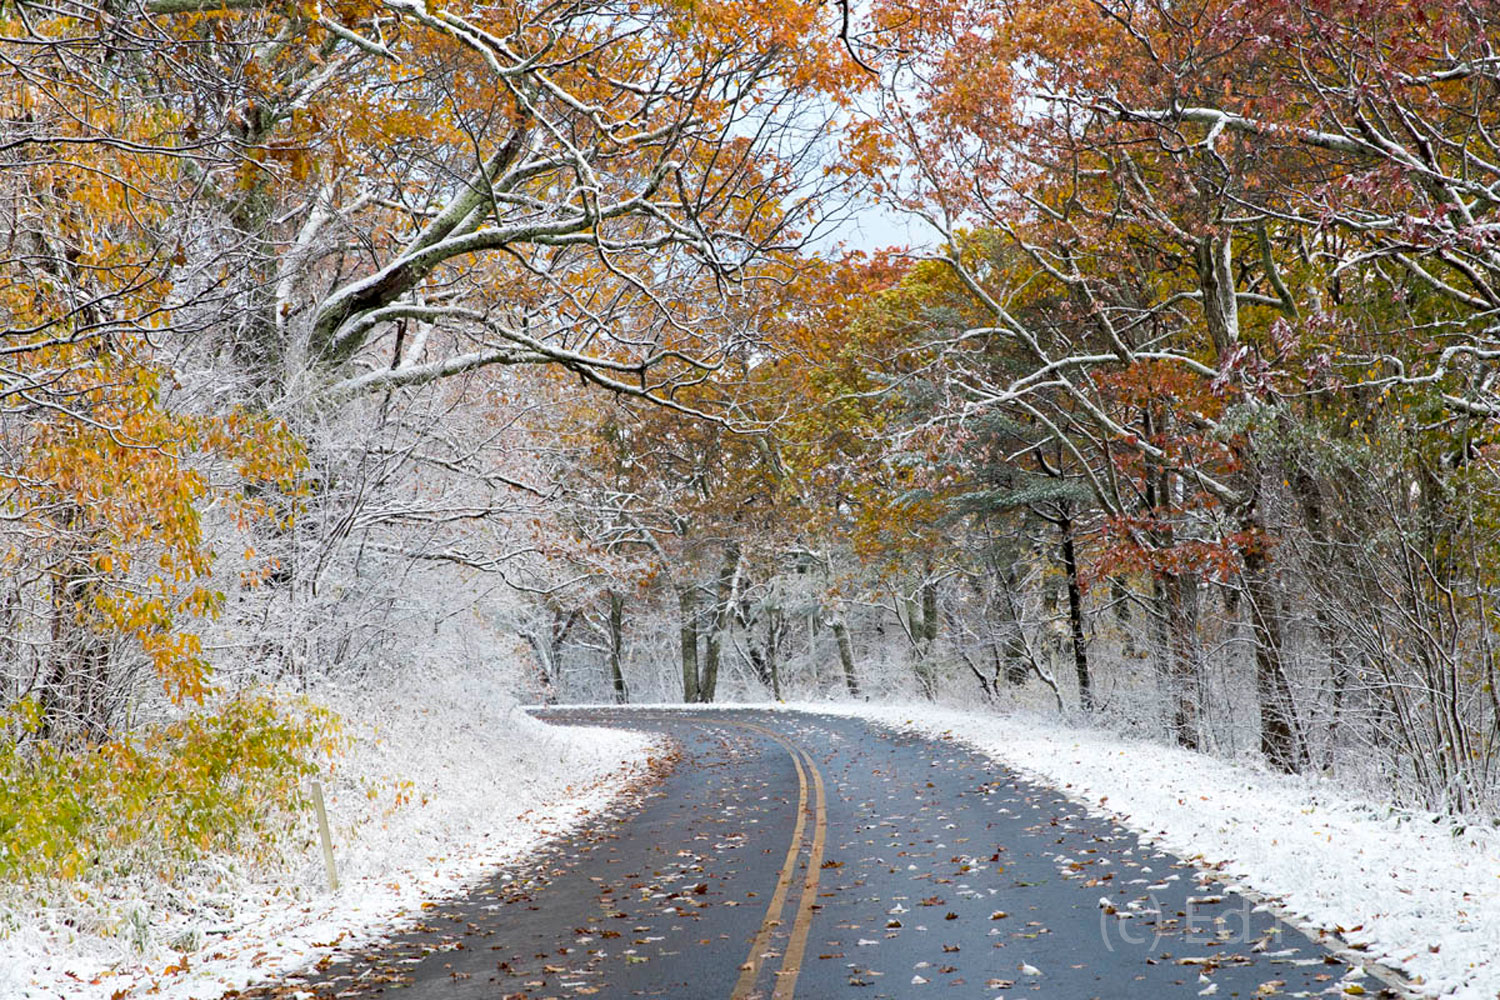 On this snowy morning, Skyline Drive is empty.  There remains a surprising amount of fall color.  It is beautiful and quiet drive...